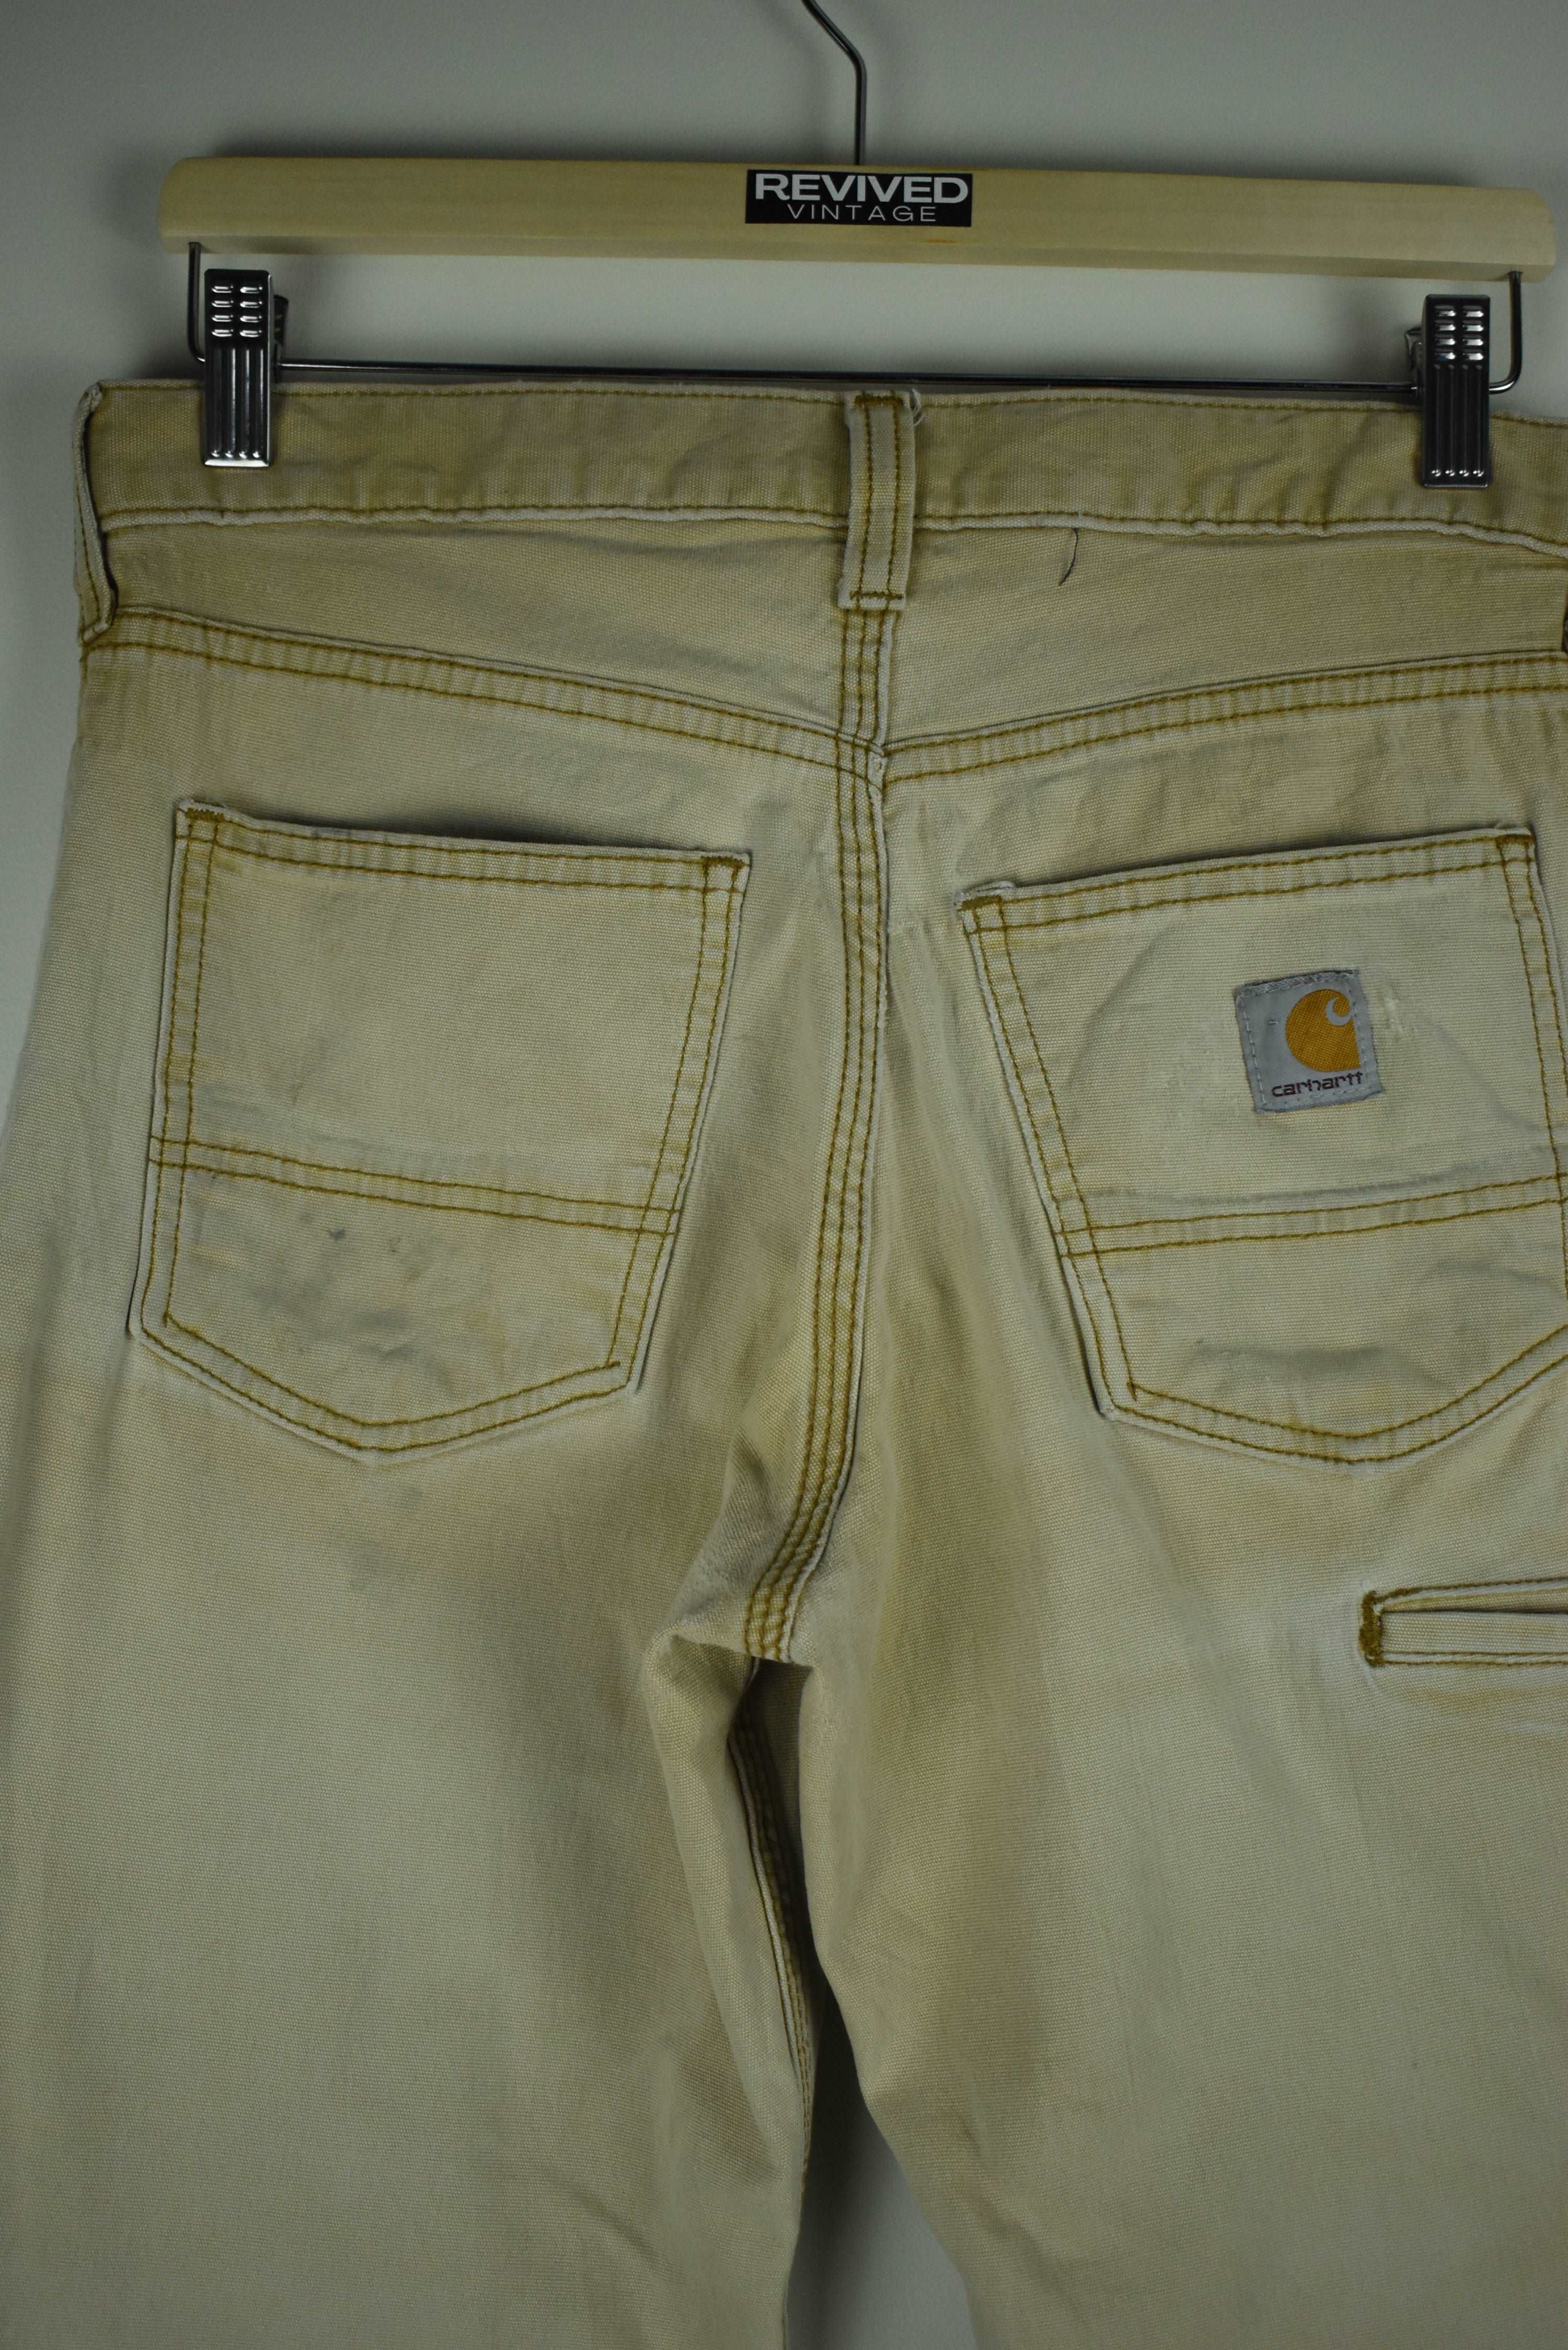 Vintage Carhartt Classic Jeans Relaxed Fit 30 x 30